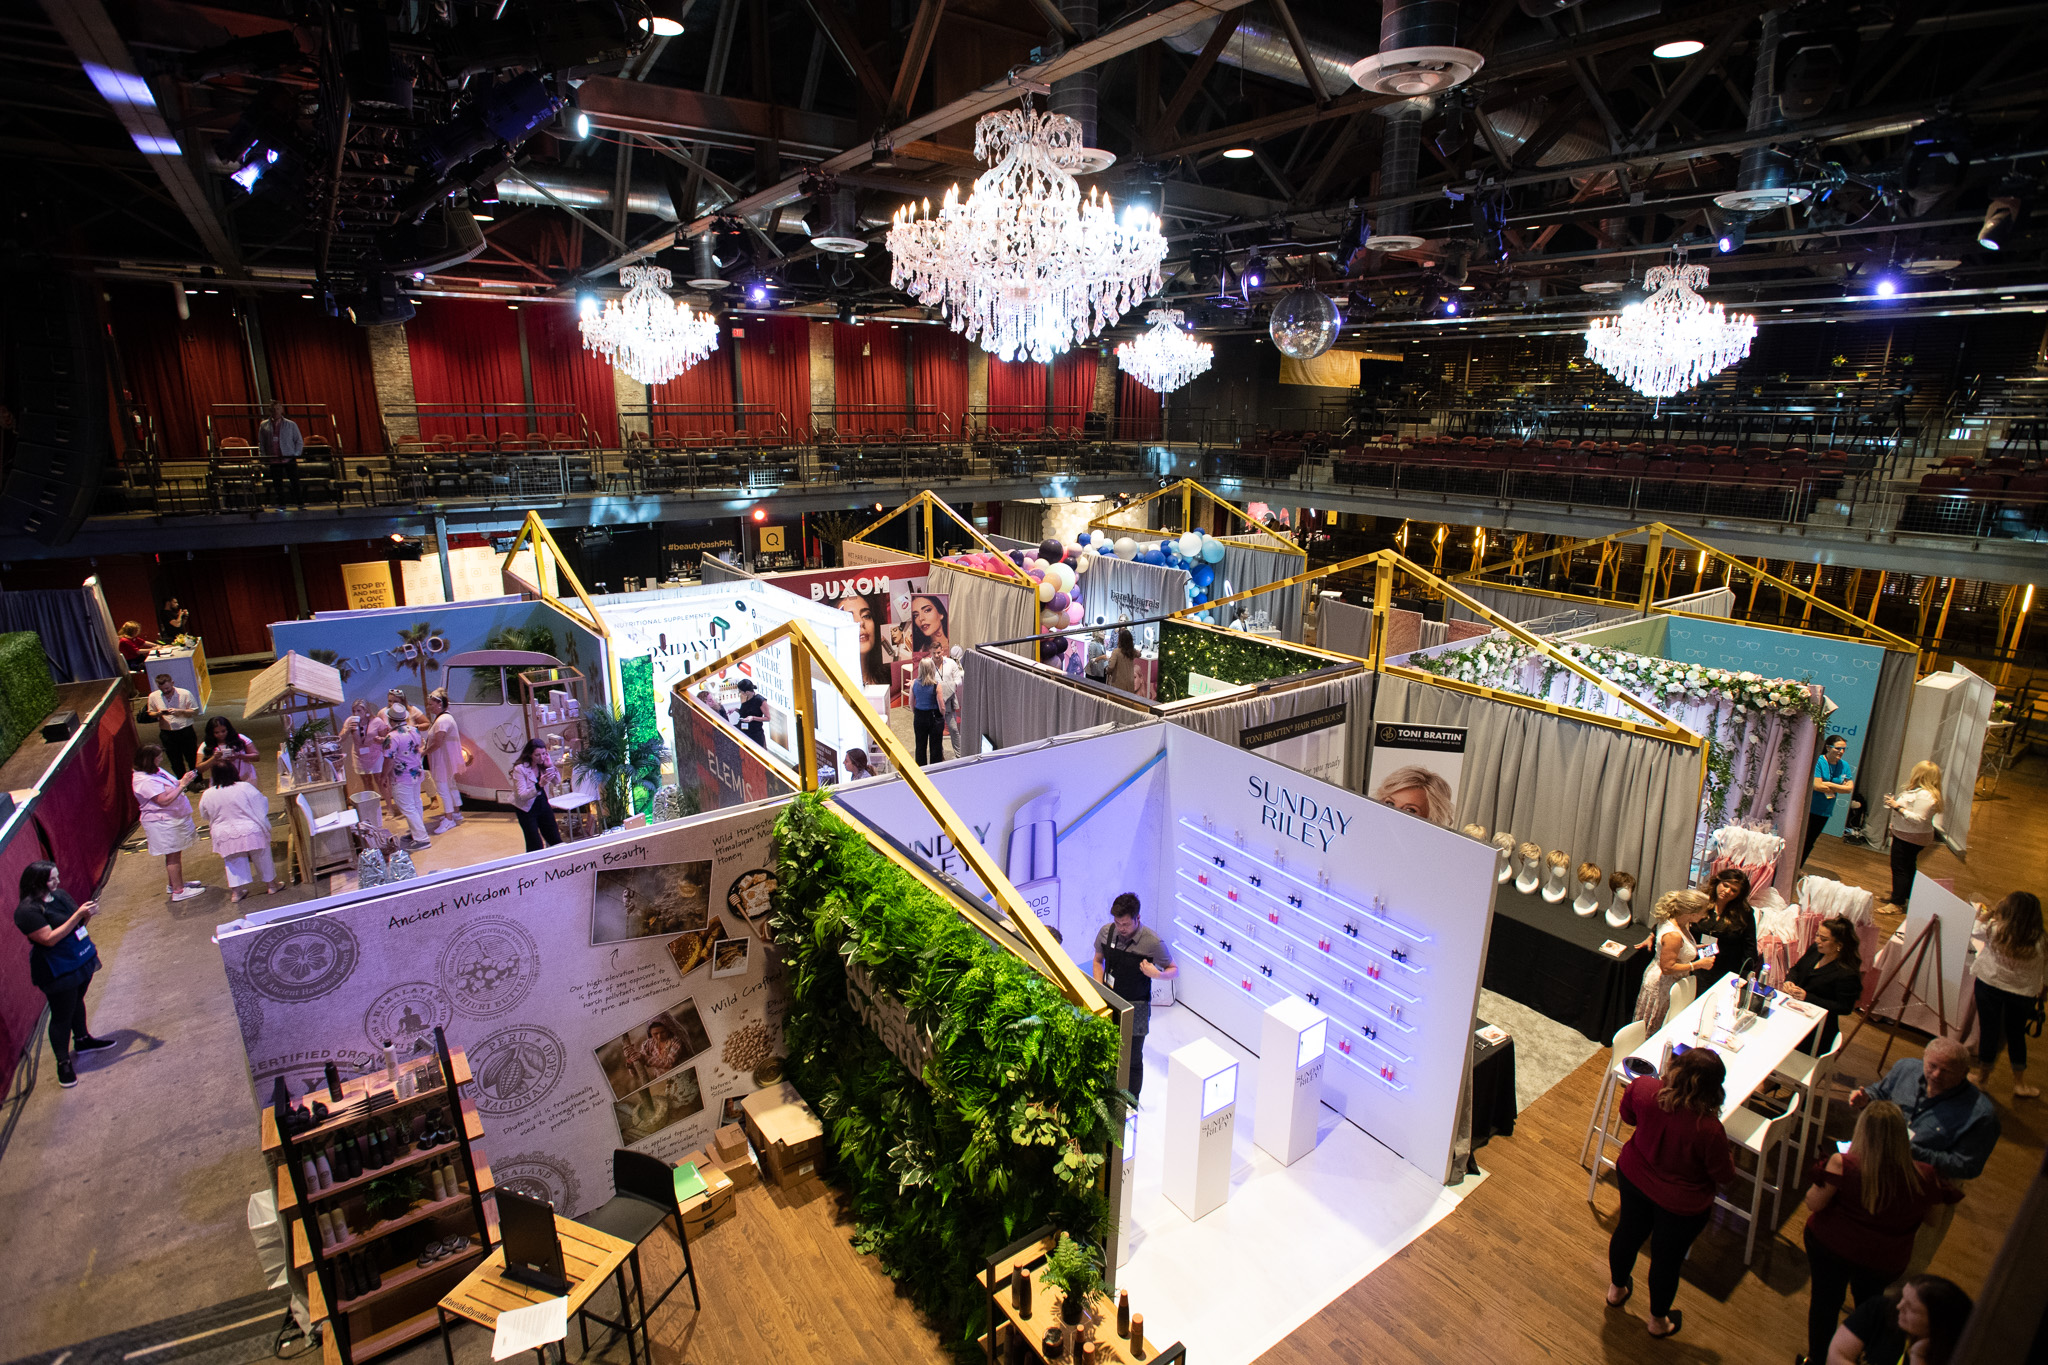 QVC Beauty Bash at The Fillmore in Philadelphia - Full Event Production.  Photo: @DRUF